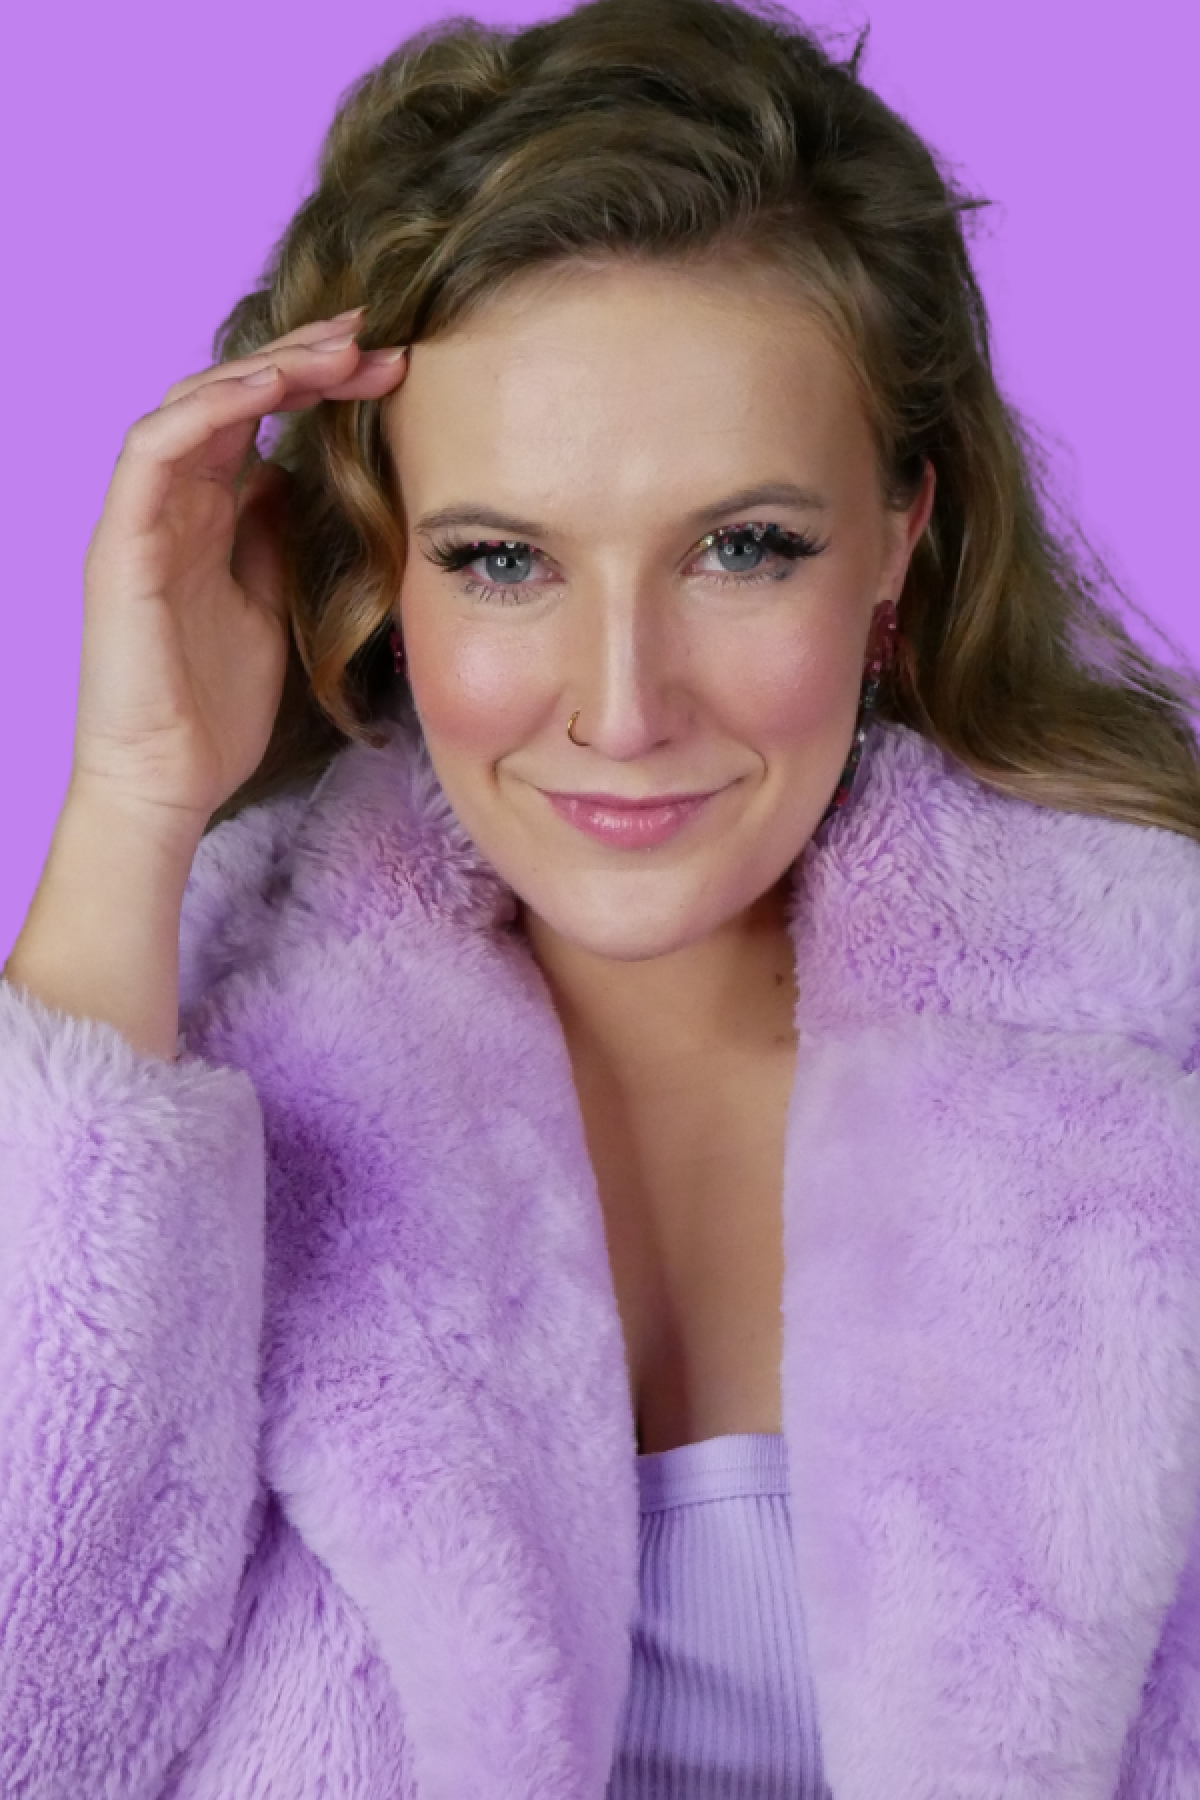 A photo of Millicent Sarre in a purple fluffy jacket